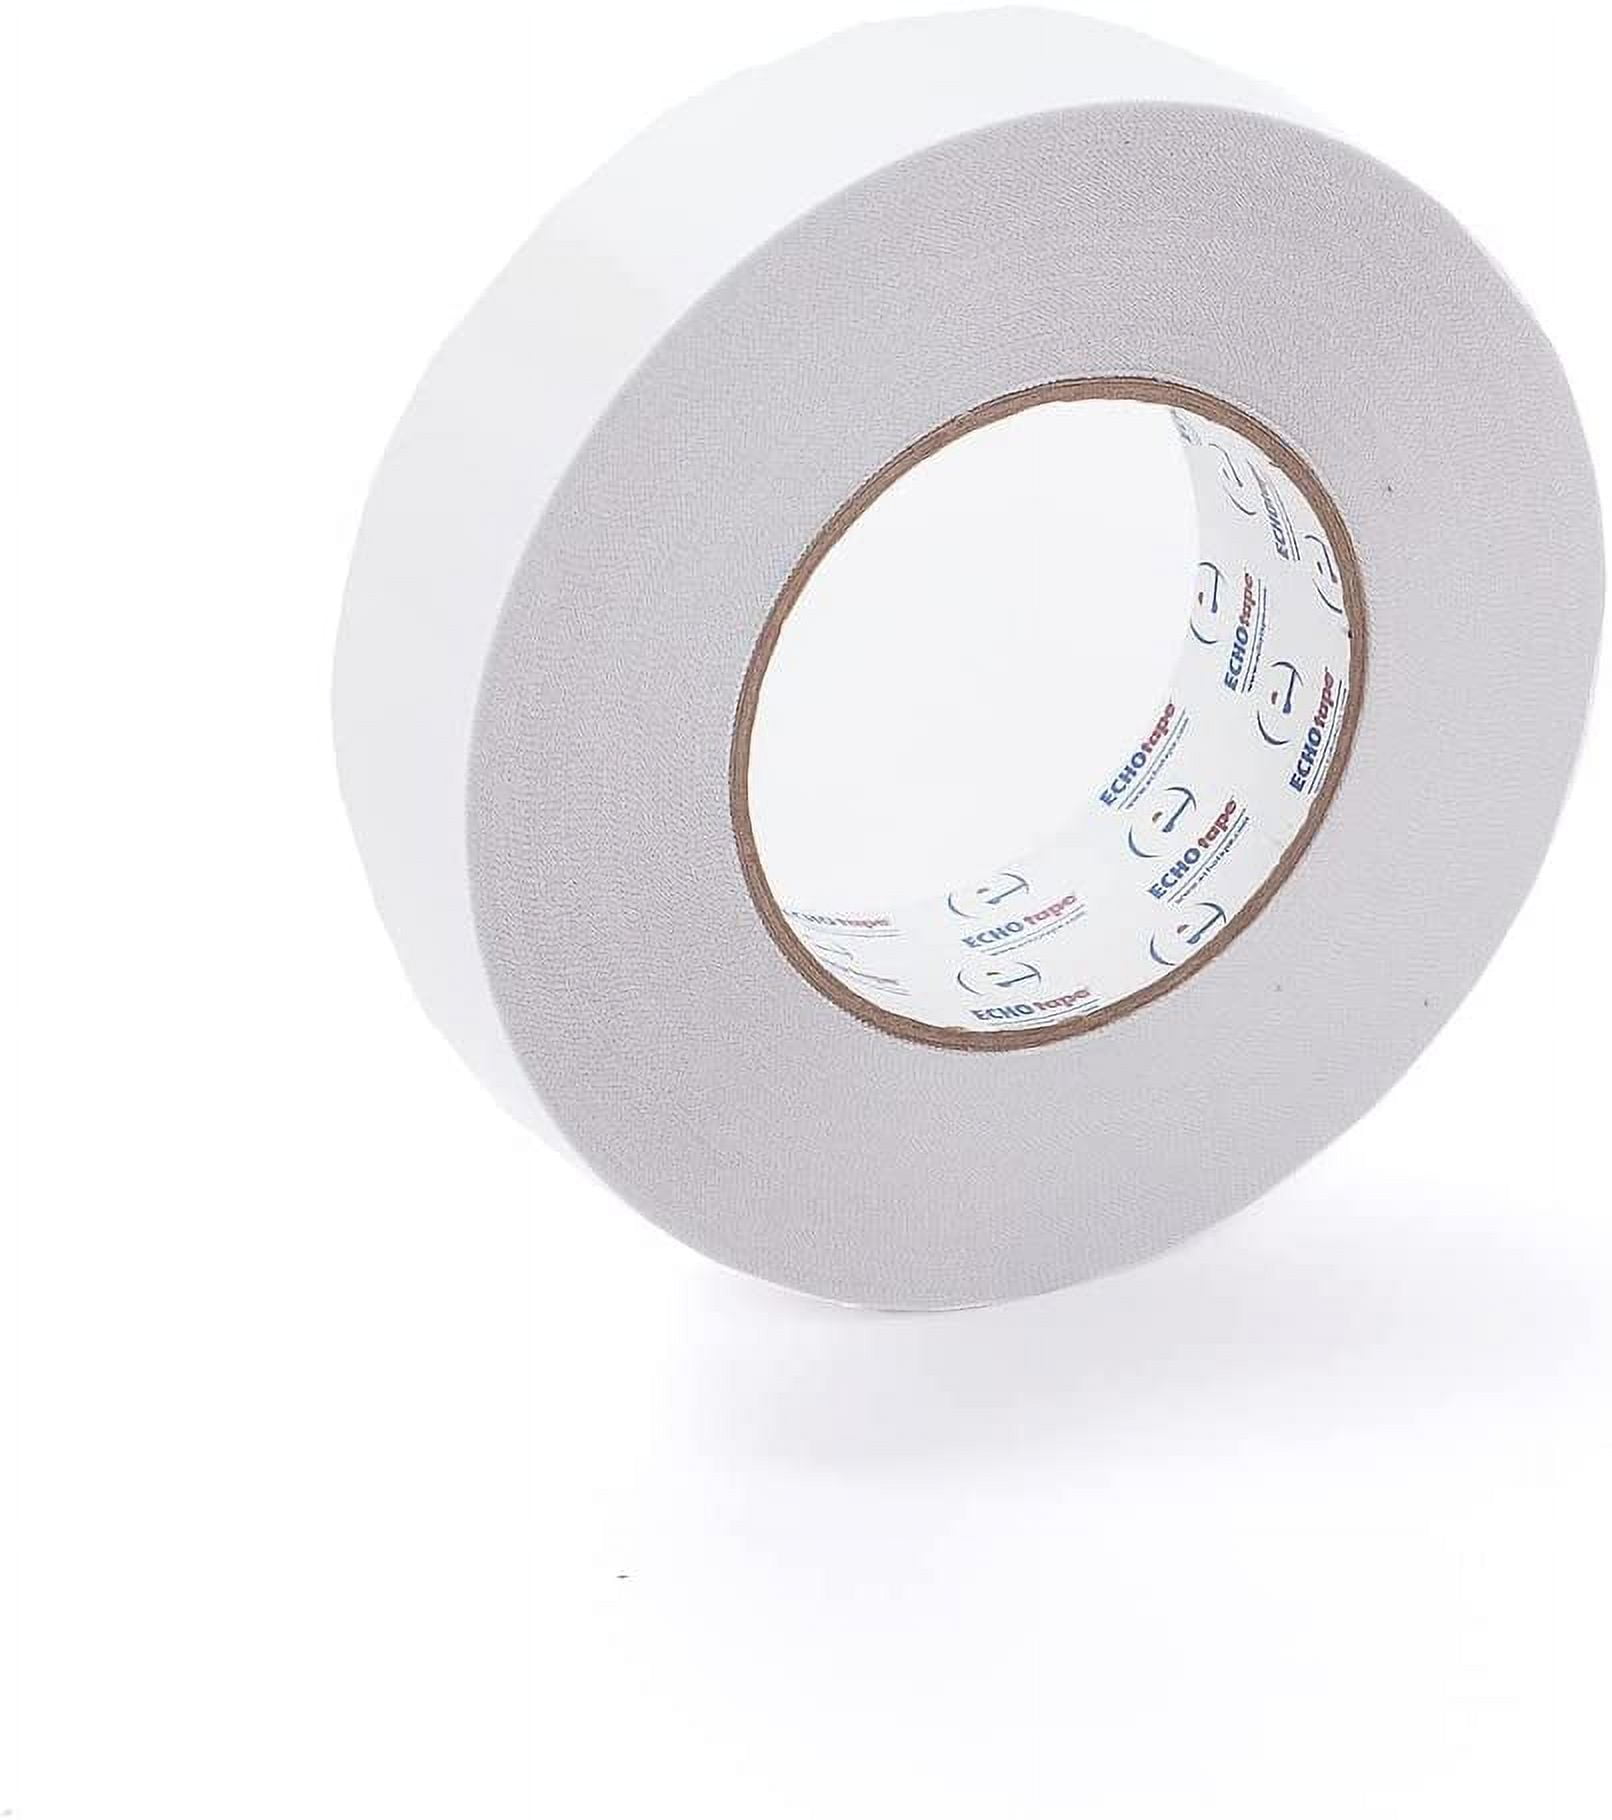 High Temperature Tape - Single & Double Sided Adhesive Tapes - ApeTape